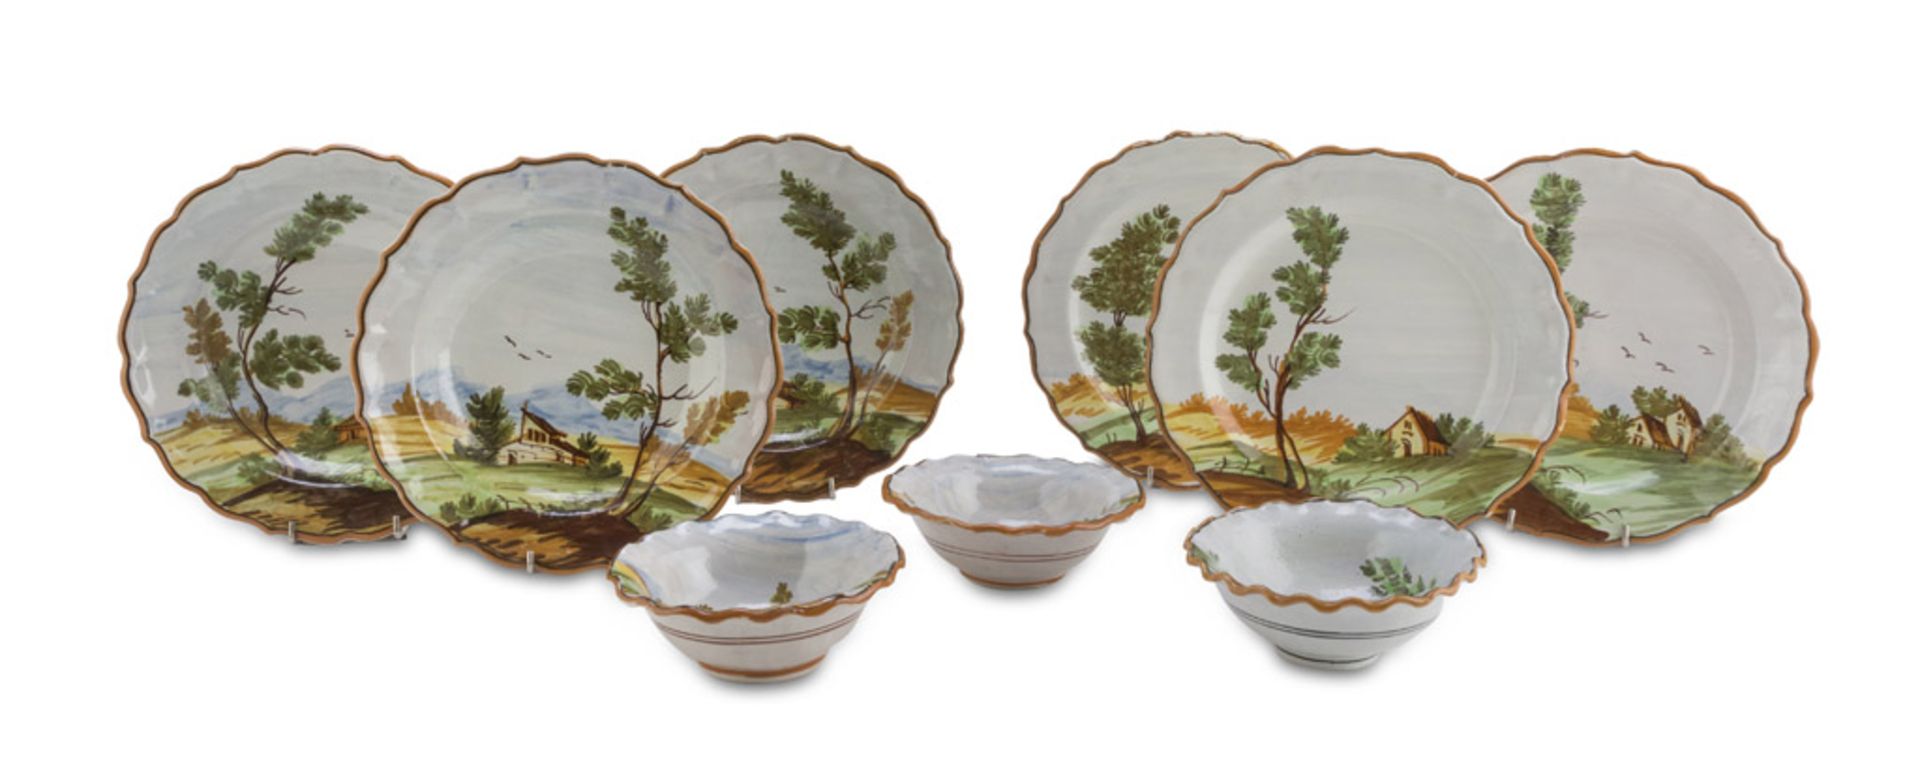 SERVICE OF CERAMIC DISHES, CASTLES 20TH CENTURY in polychromy, entirely decorated with landscapes